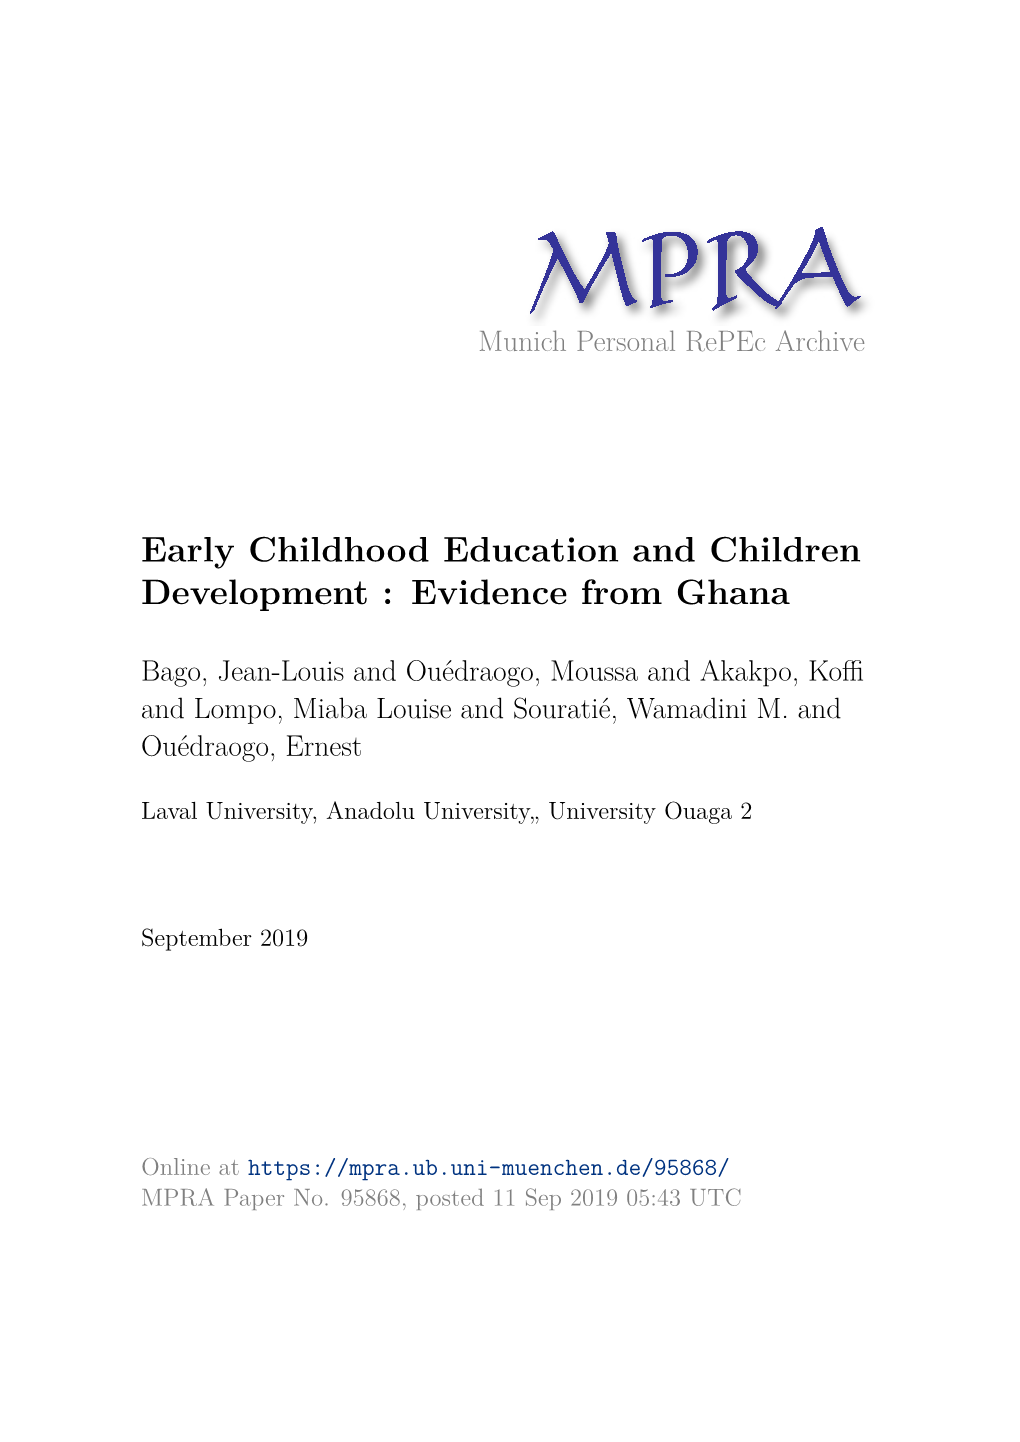 To What Extent Does Early Childhood Education Affect Child Development